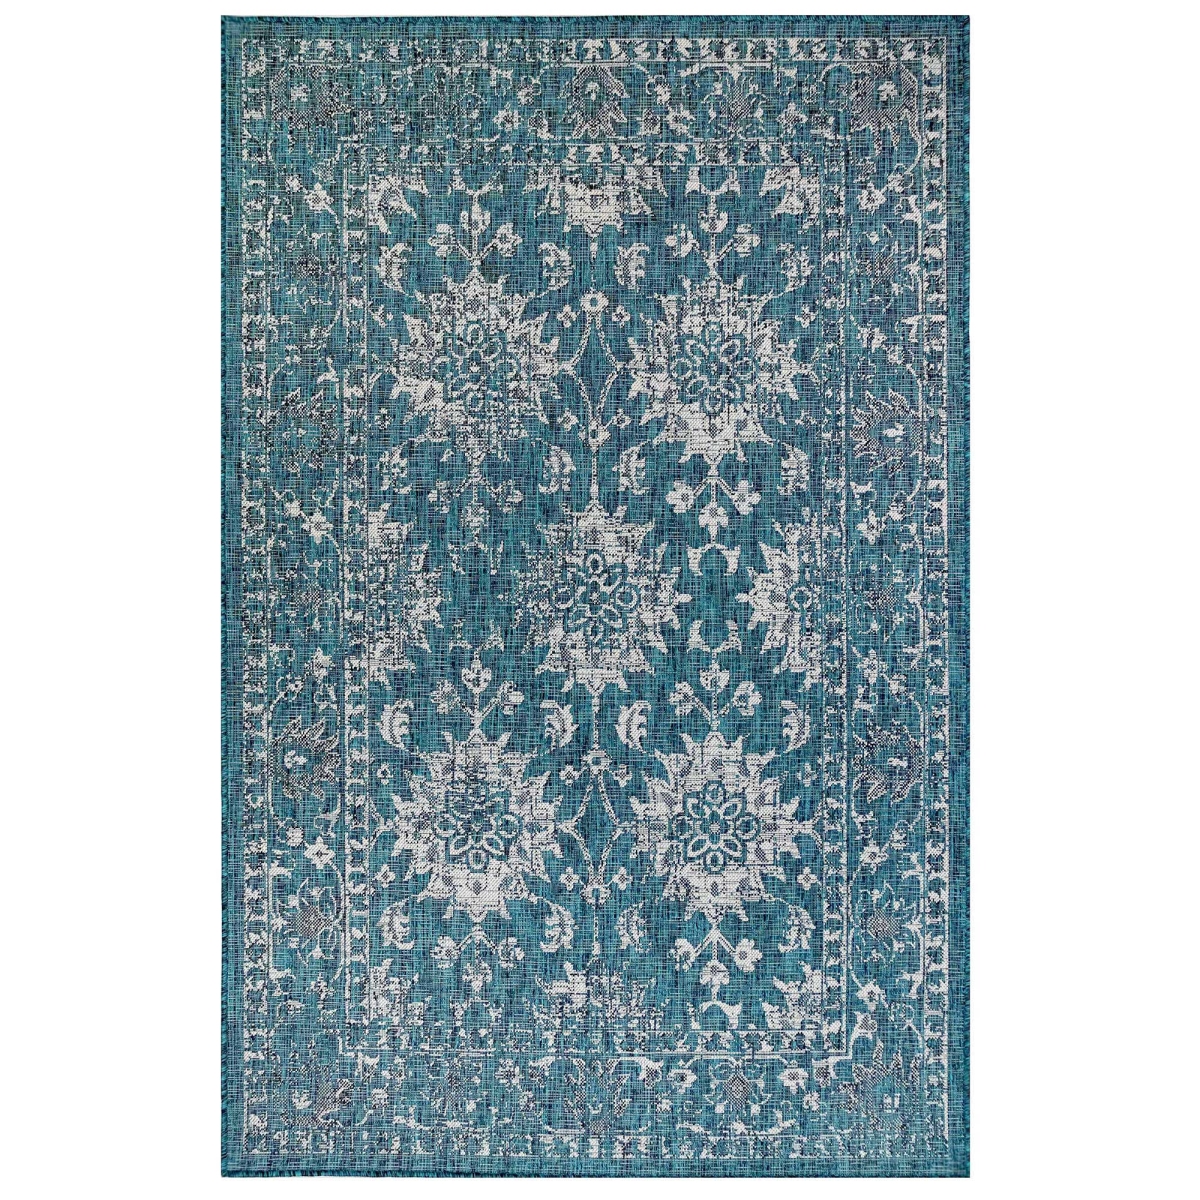 Trans-ocean Imports Cre69841894 6 Ft. 6 In. X 9 Ft. 4 In. Liora Manne Carmel Vintage Floral Indoor & Outdoor Rug Wilton Woven Rug - Teal